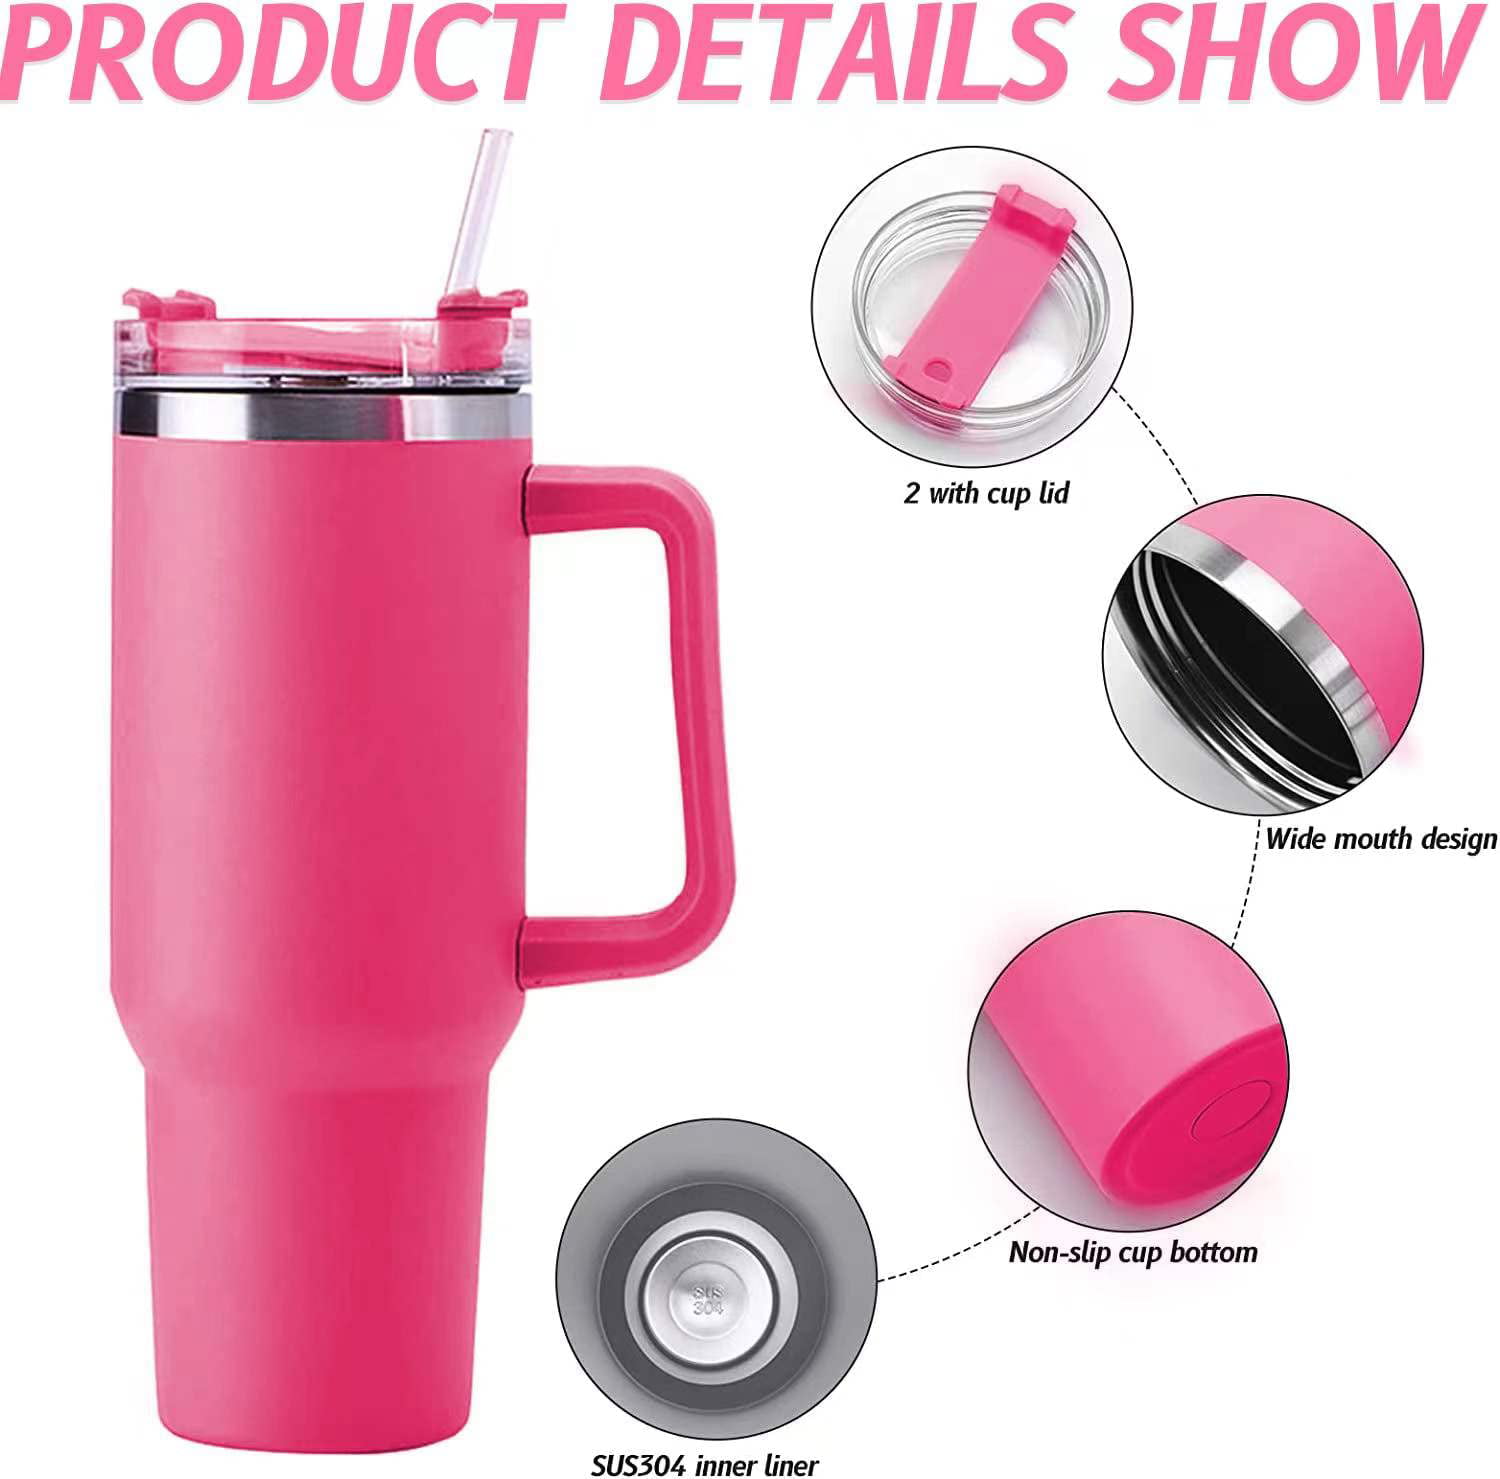 Immekey 40 oz Tumbler Insulated Water Bottle with Straw Flip Straw Tumbler Travel Mug Cup with Handle for Women & Men-Rose Red, Size: One Size